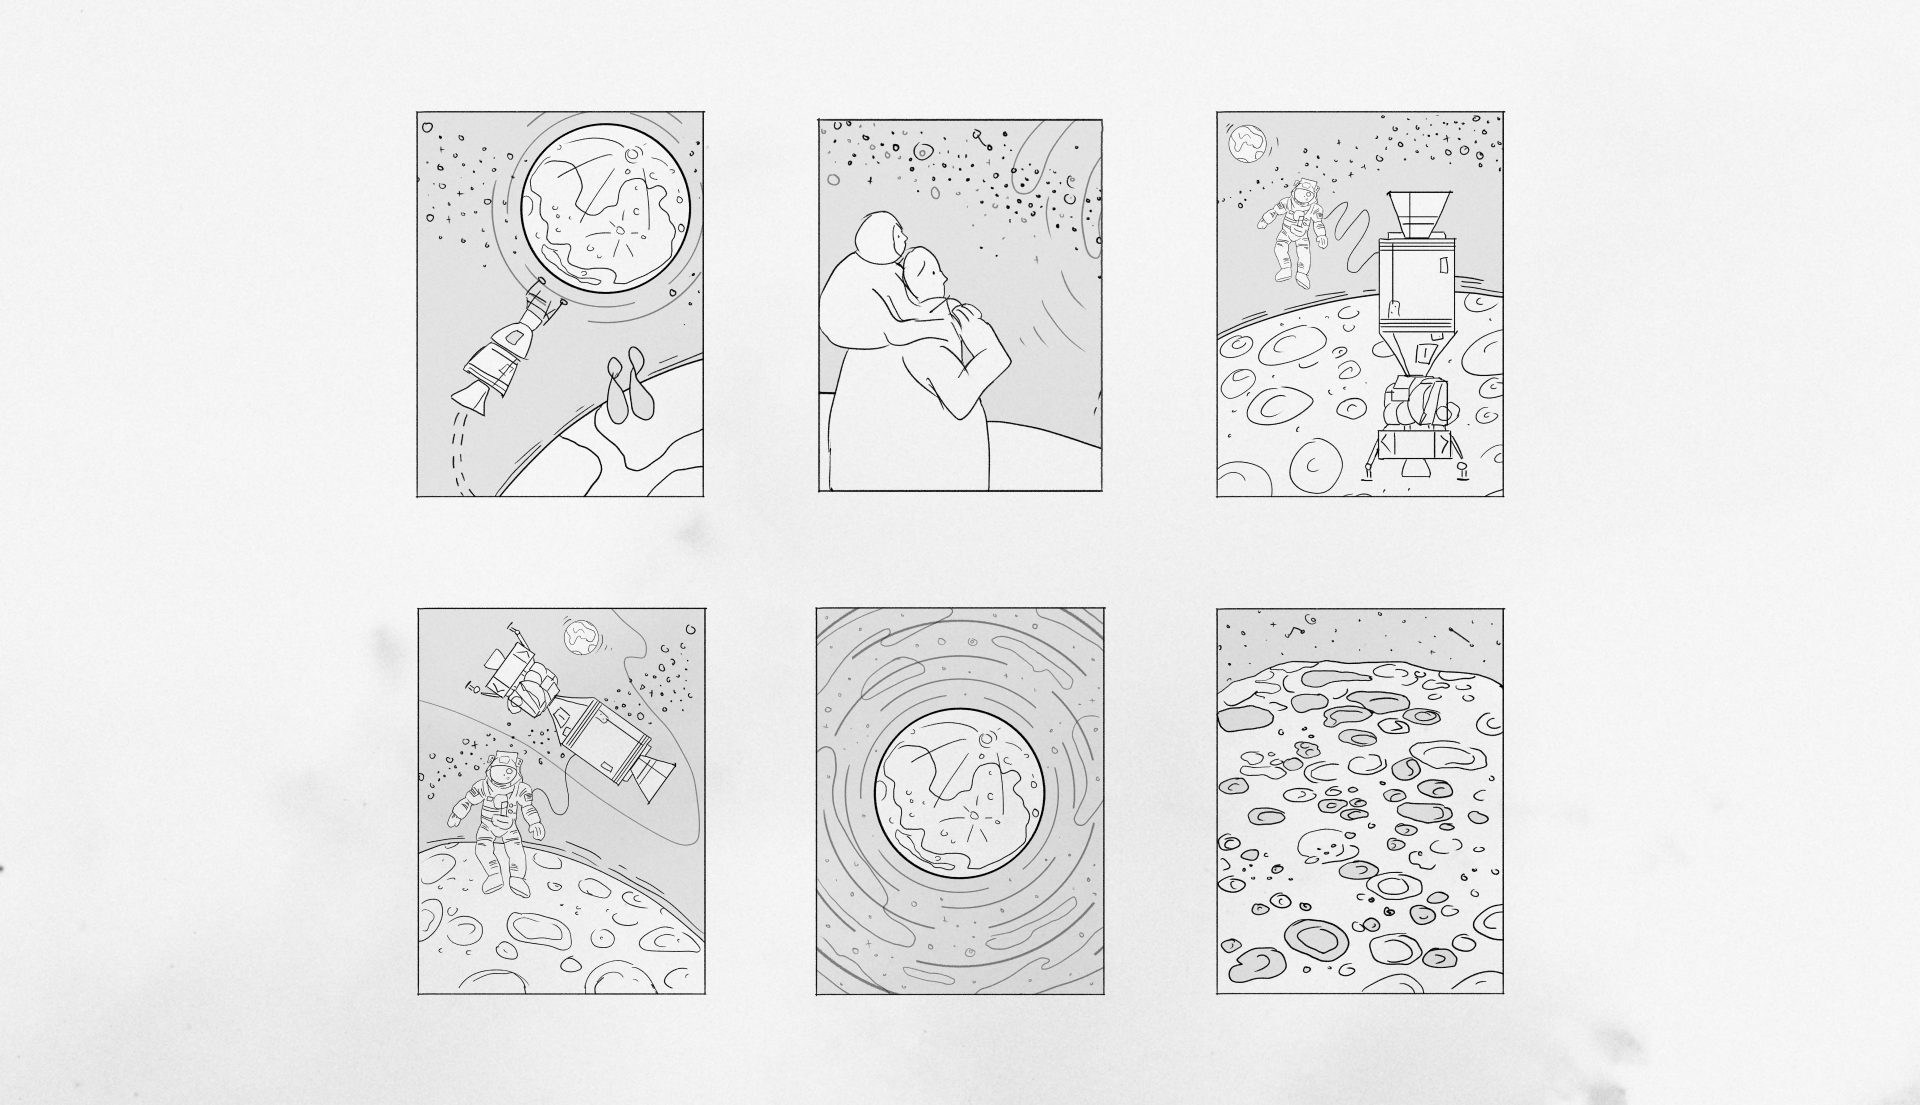 Concept sketches of illustrations. Rough pencil sketches featuring the moon, people on earth, rockets and space.